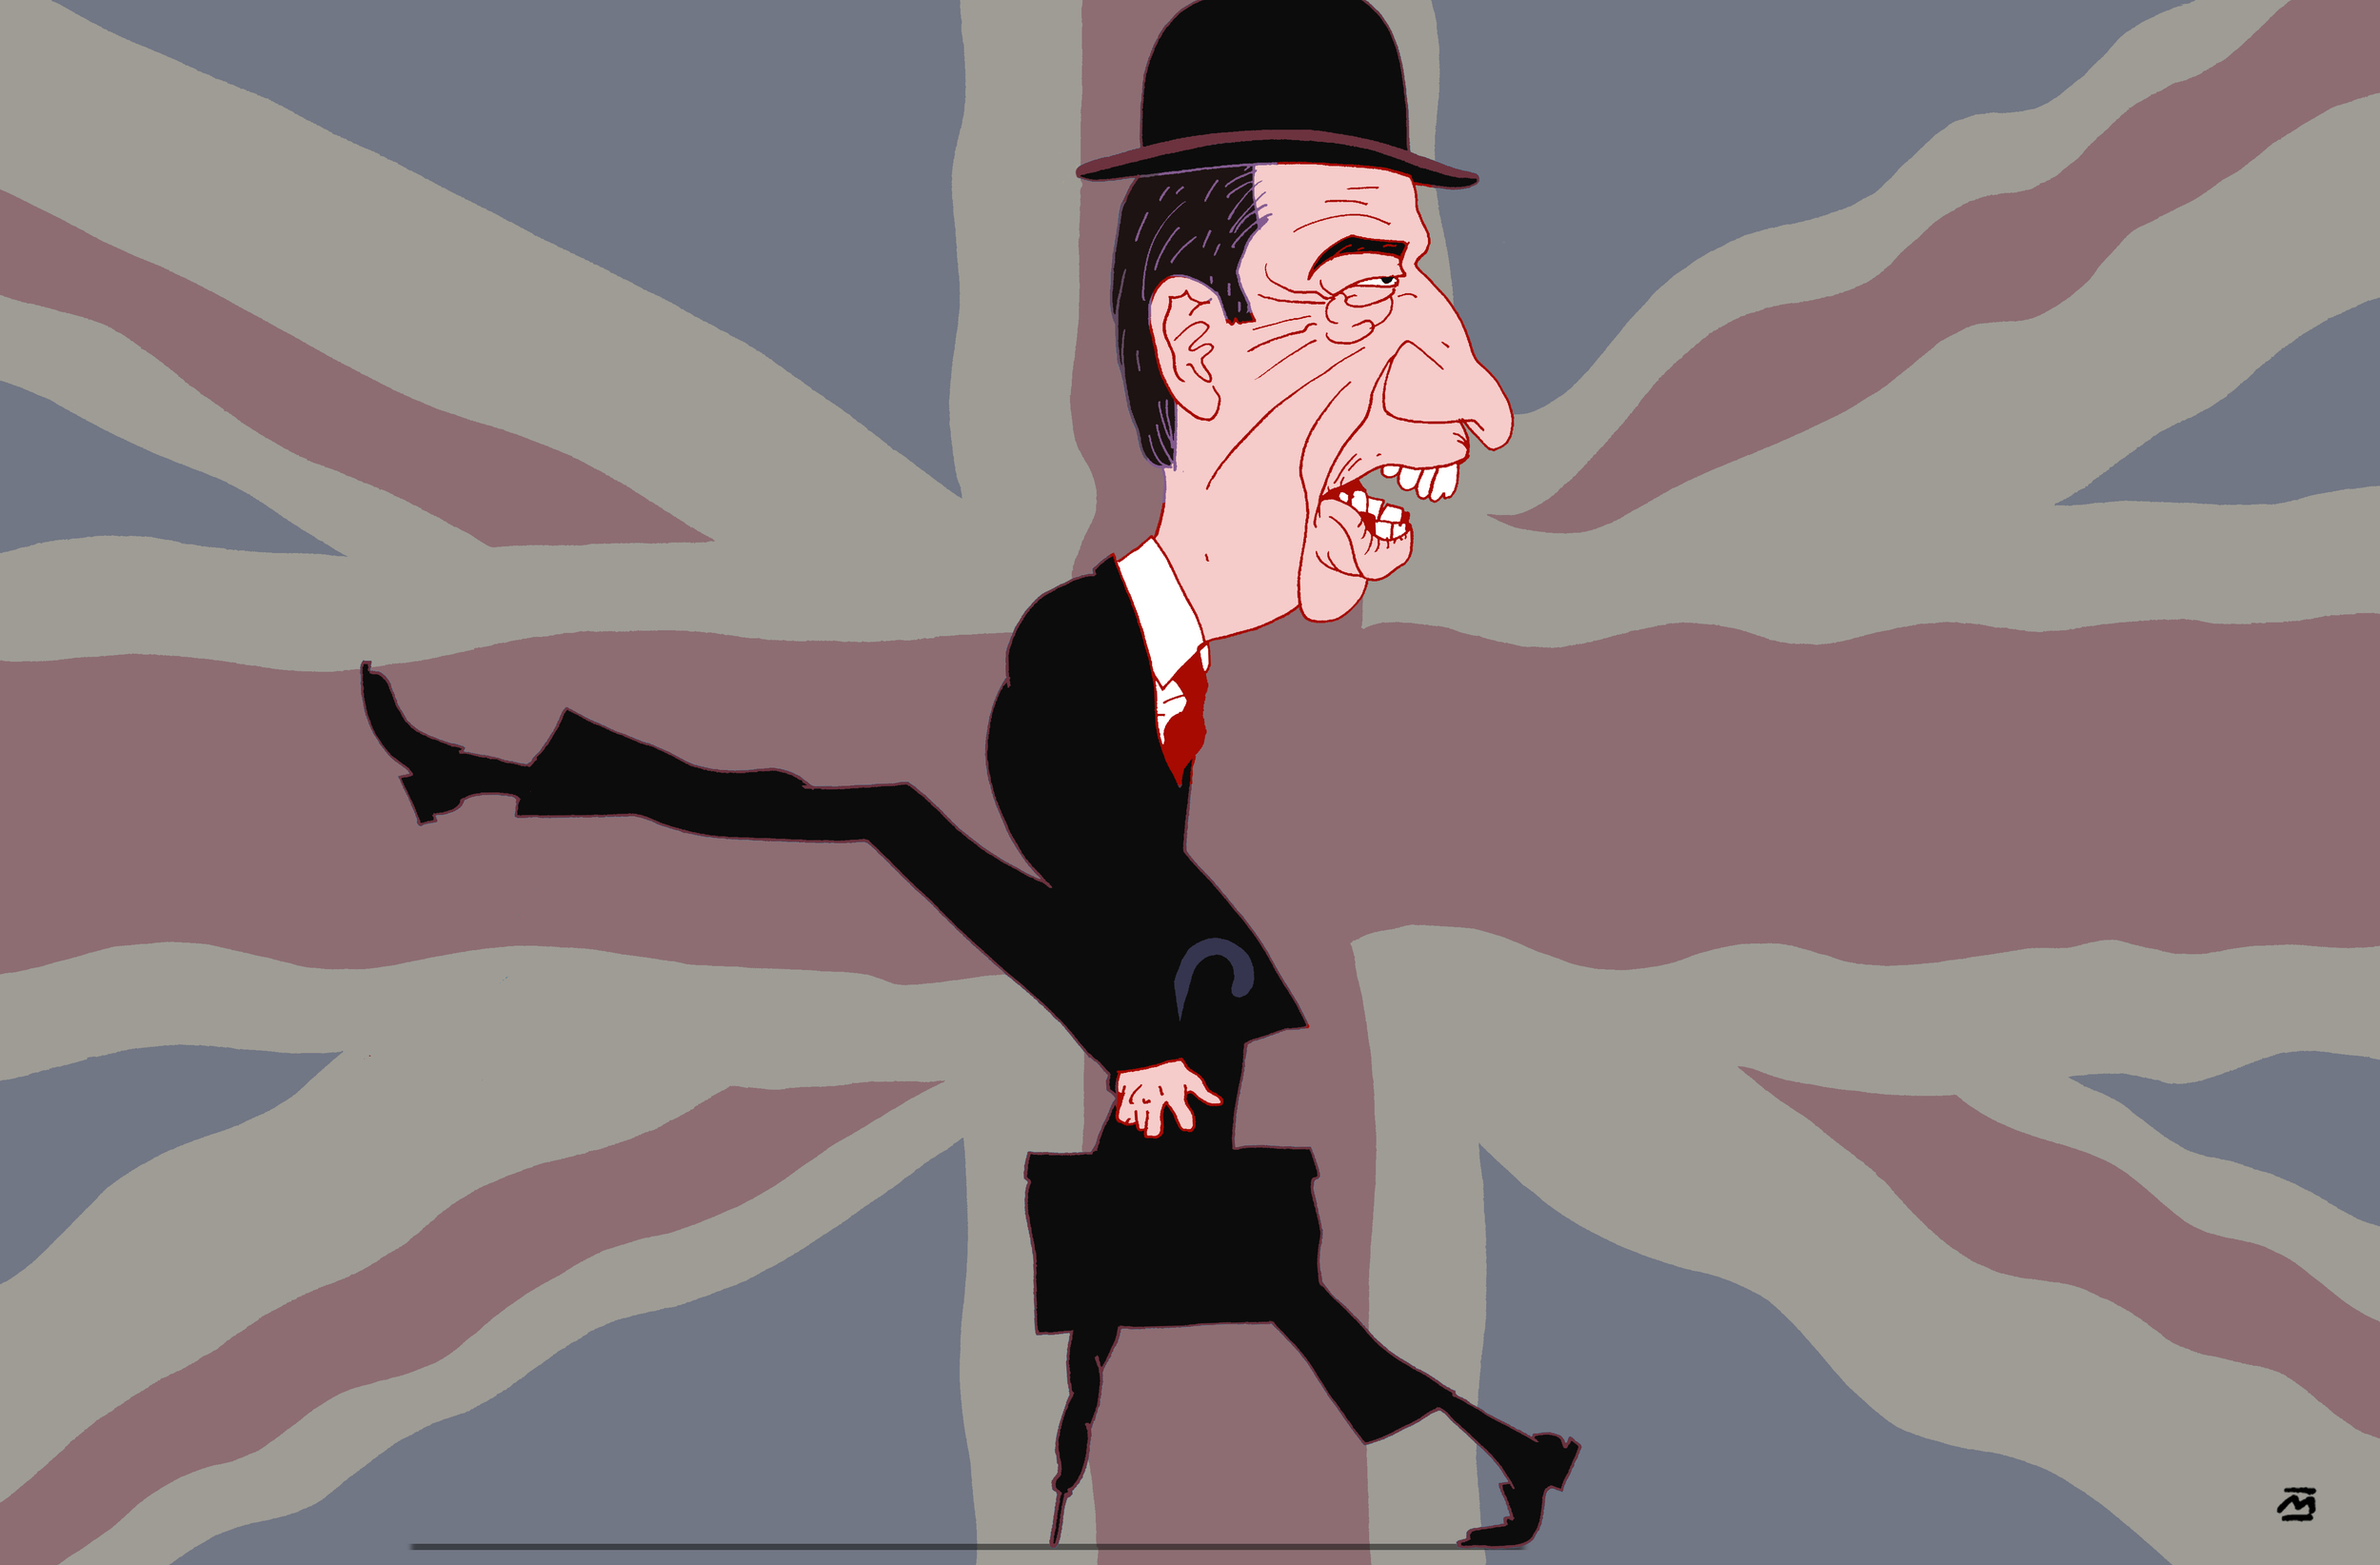 Ministry of silly walks